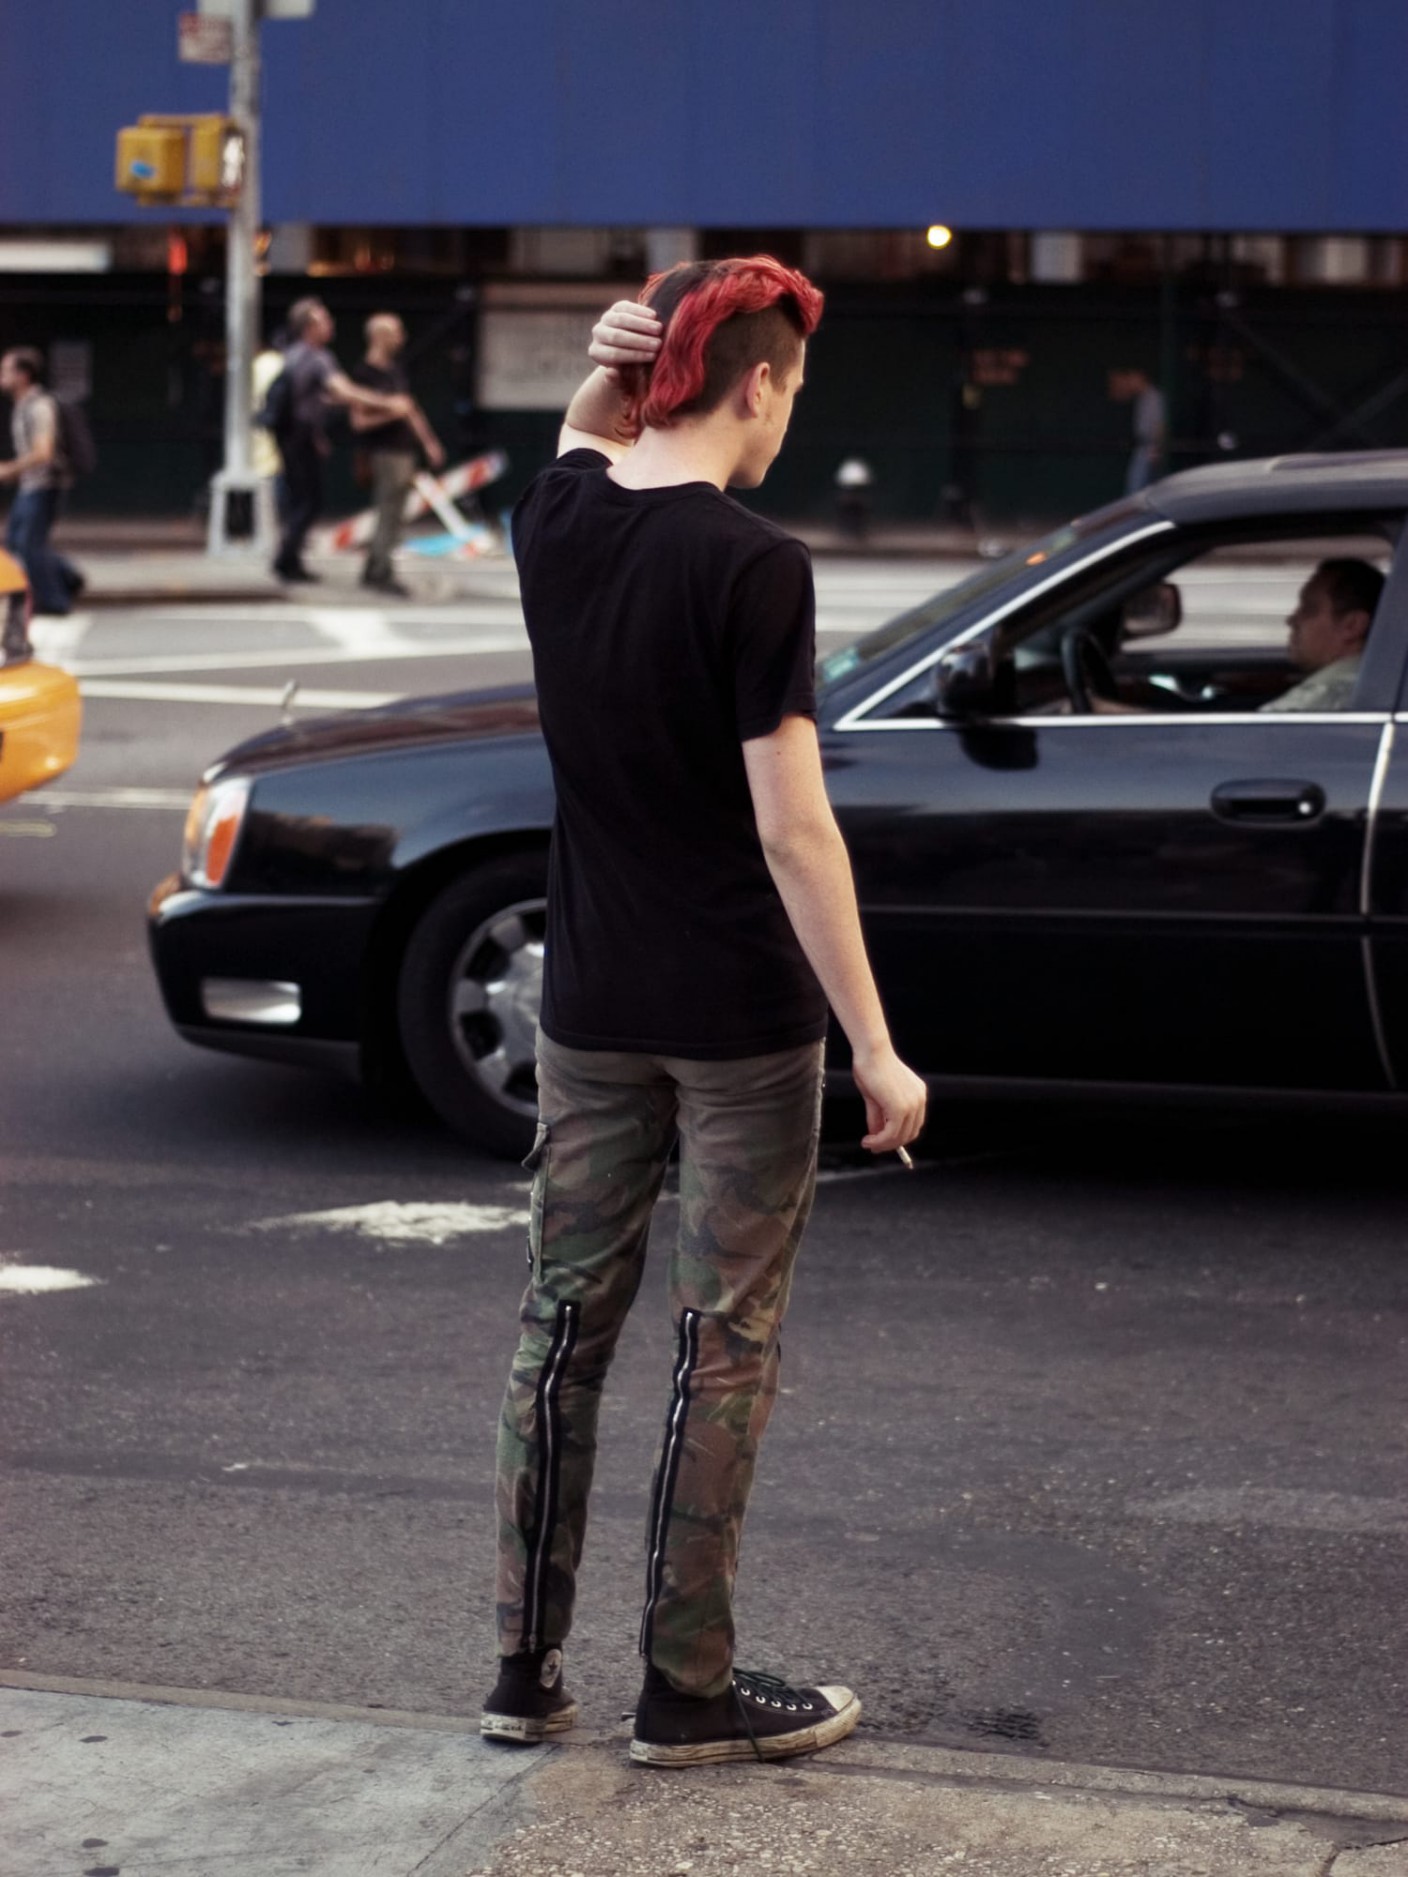 Portrait of a person on a sidewalk, with red dyed hair, a black shirt, and camouflage pants